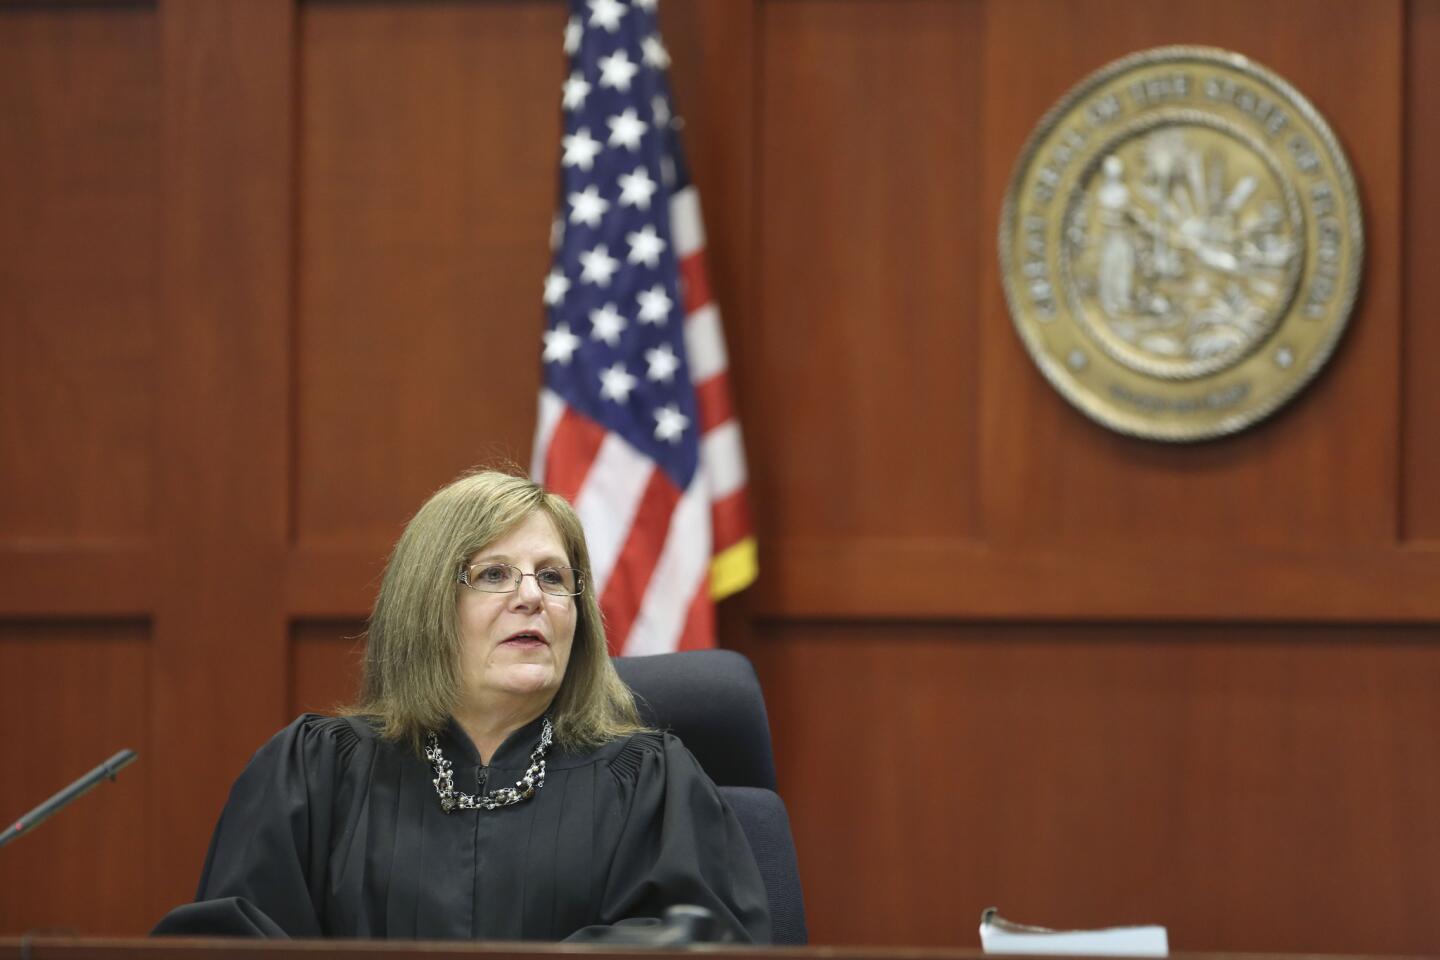 Judge Debra Nelson gives instructions to the jury at the end of the day during George Zimmerman's trial in Seminole circuit court in Sanford, Fla. Friday, July 5, 2013. Zimmerman has been charged with second-degree murder for the 2012 shooting death of Trayvon Martin. (Gary W. Green/Orlando Sentinel)